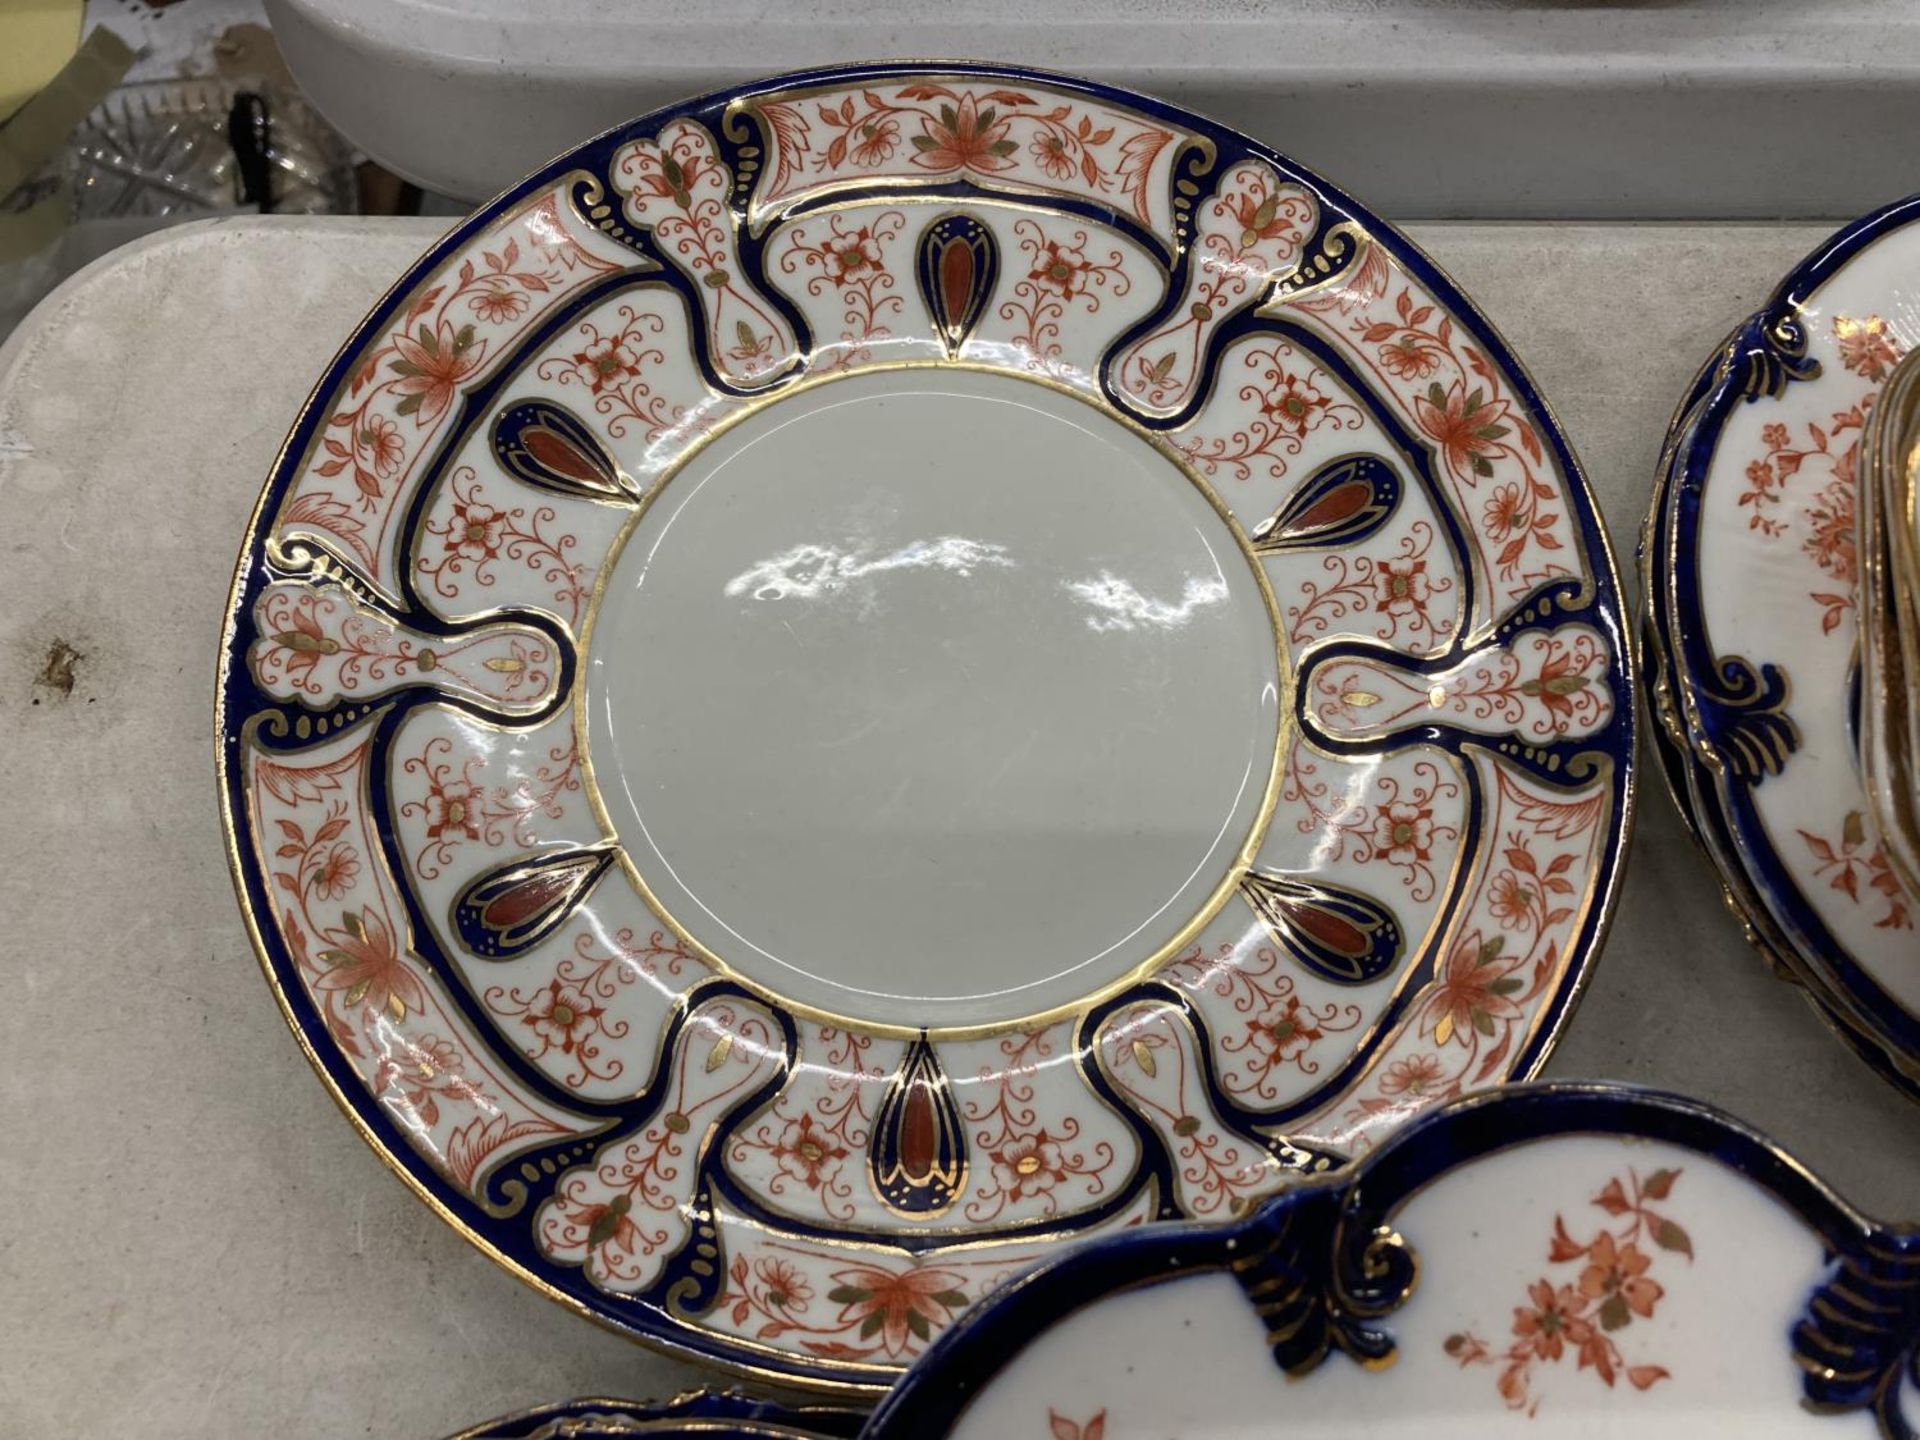 A COLLECTION OF ANTIQUE DAISY SHAPED PLATES PLUS CARLISLE WARE BURGESS BROTHERS BOWLS - Image 5 of 6